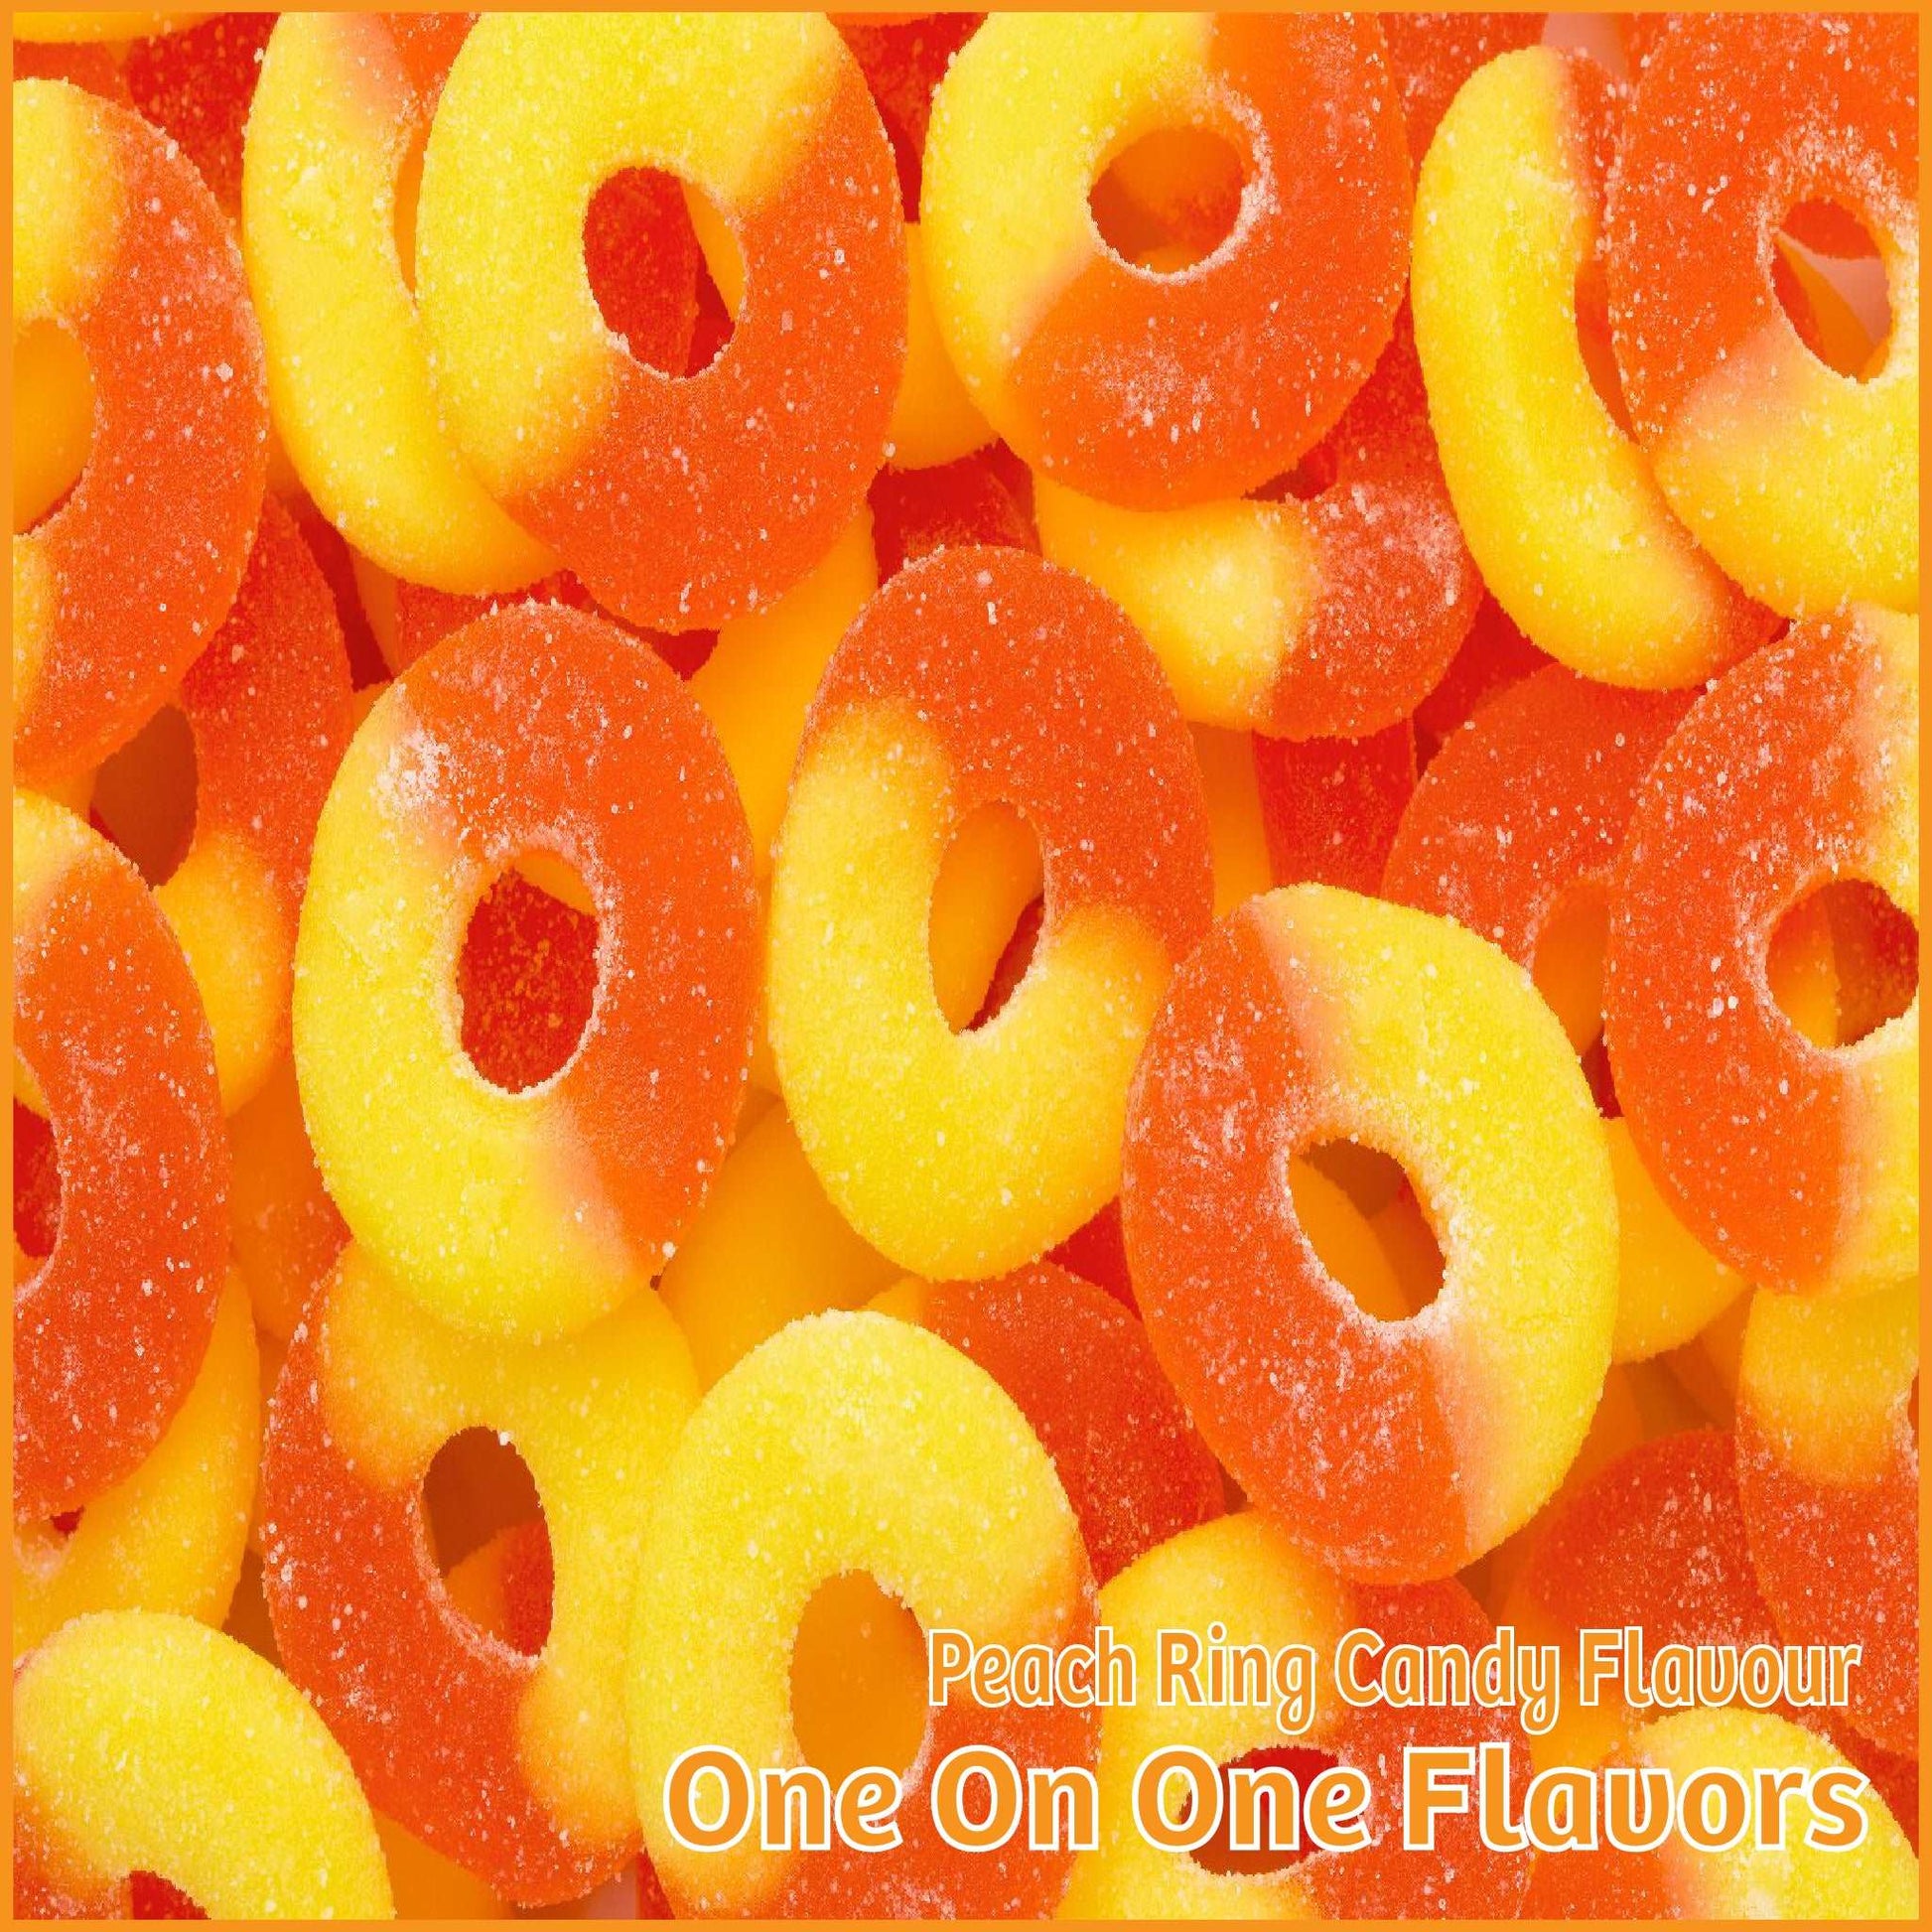 Peach Ring Candy Flavour- One On One Flavors - Flavour Fog - Canada's flavour depot.